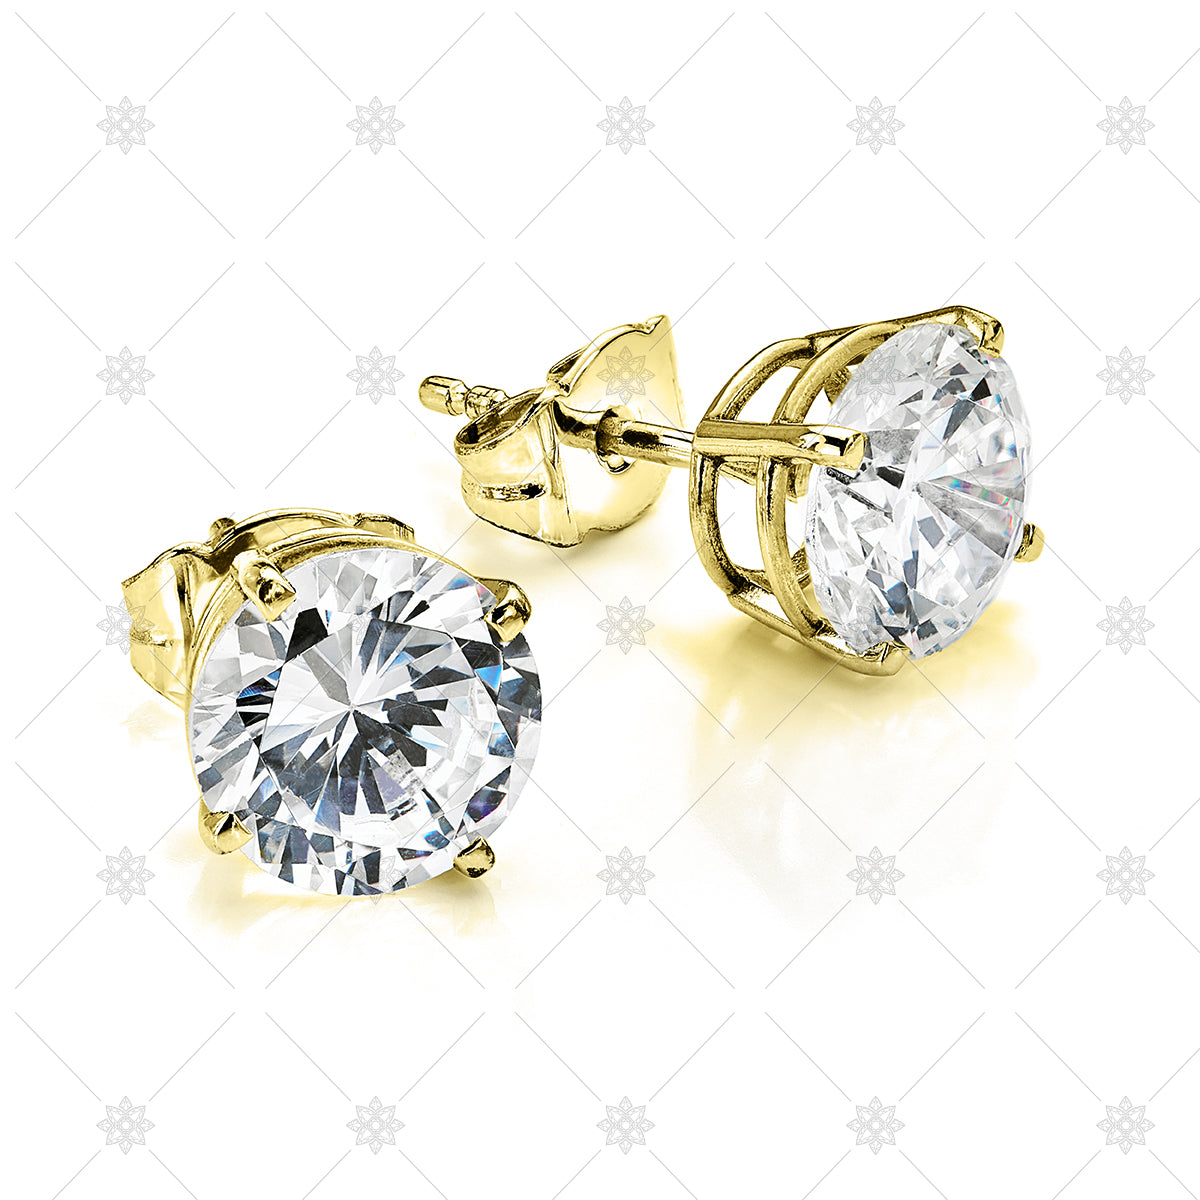 14KT Yellow Gold Diamond Earrings To Fortify Your Friendship